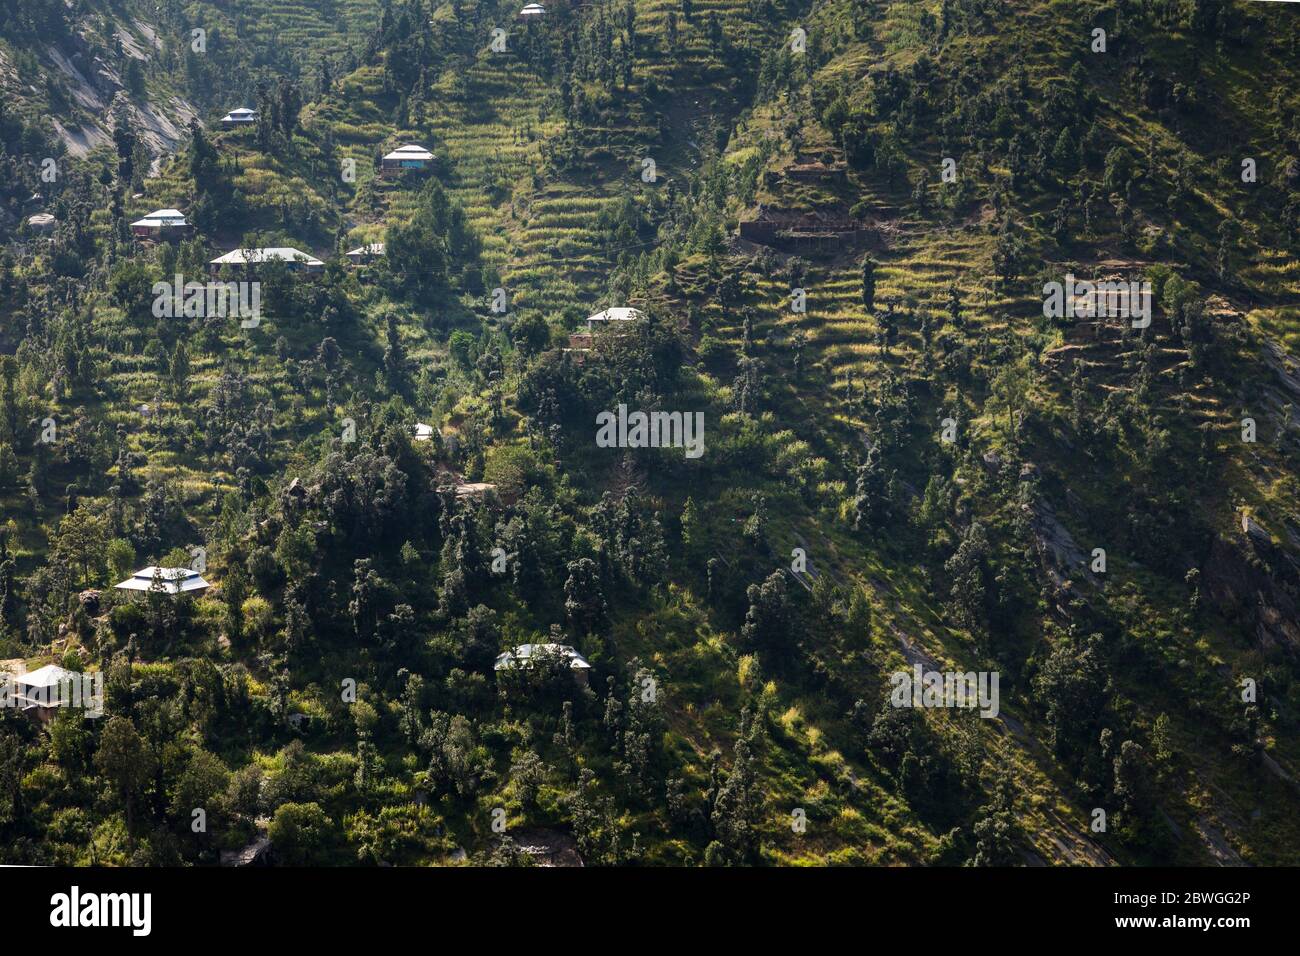 Awesome, Local houses and steep terraced field at cliff, Elum Mountain trekking, Swat, Khyber Pakhtunkhwa Province, Pakistan, South Asia, Asia Stock Photo